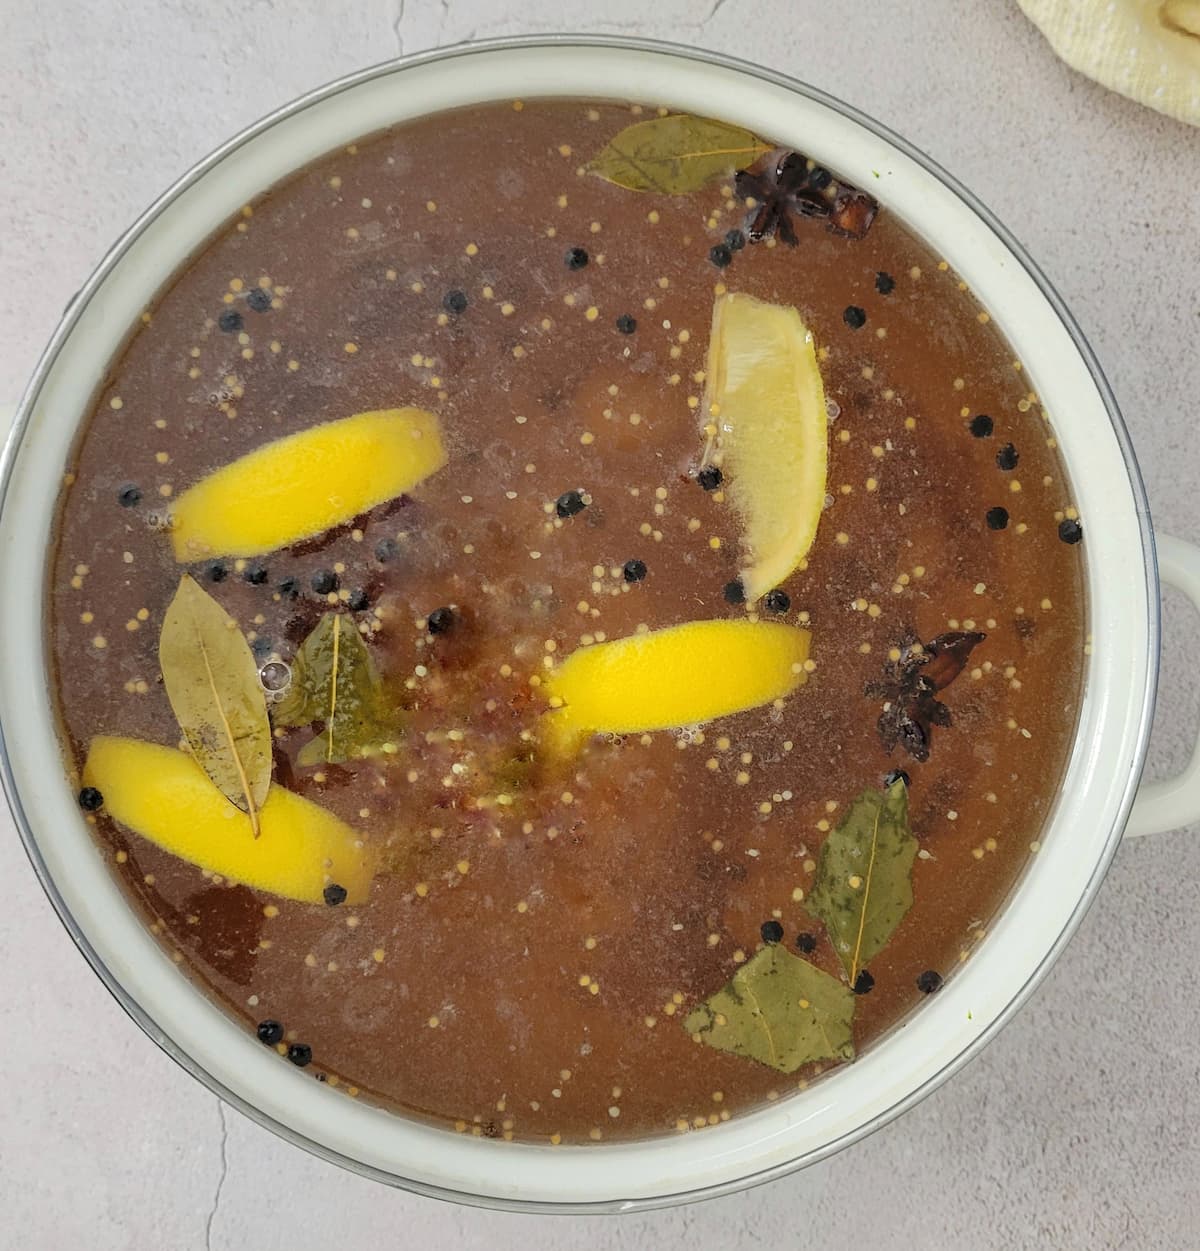 liquid in a pot with lemon wedges, peppercorns, bay leaves and star anise